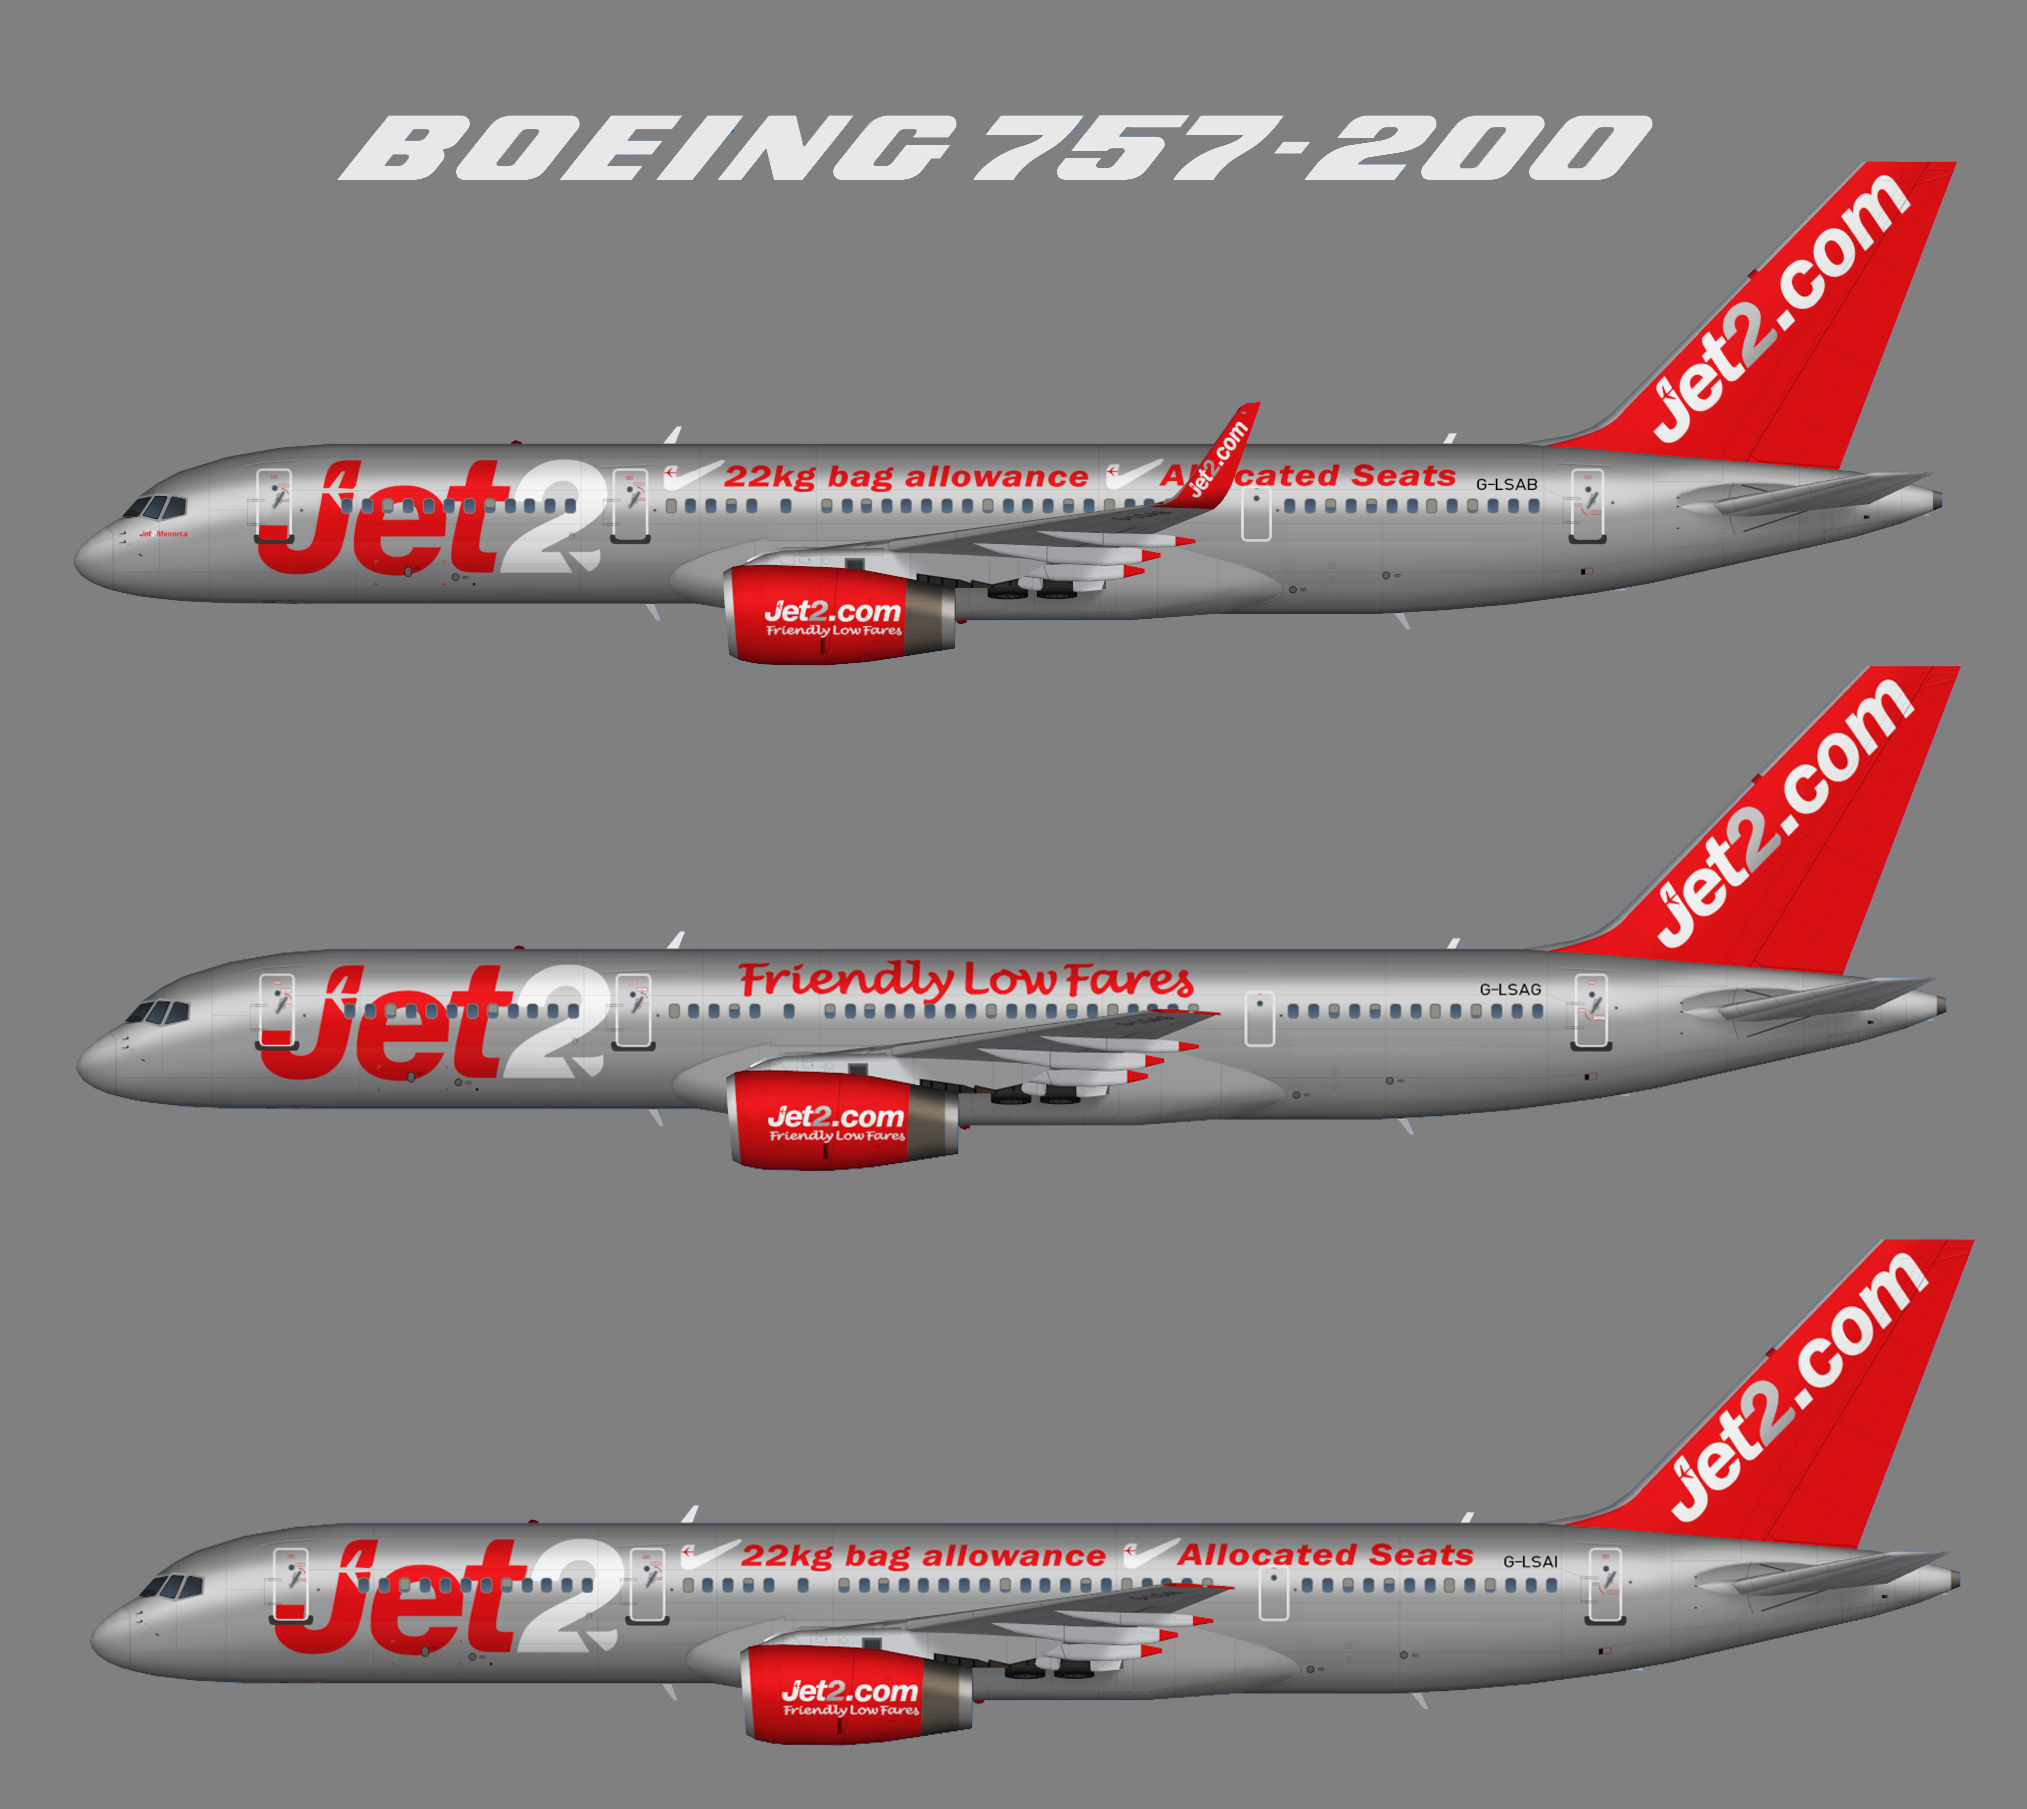 Airbus Industrie Fs2004 - Fs2004 Airliners - Fs2004 Add